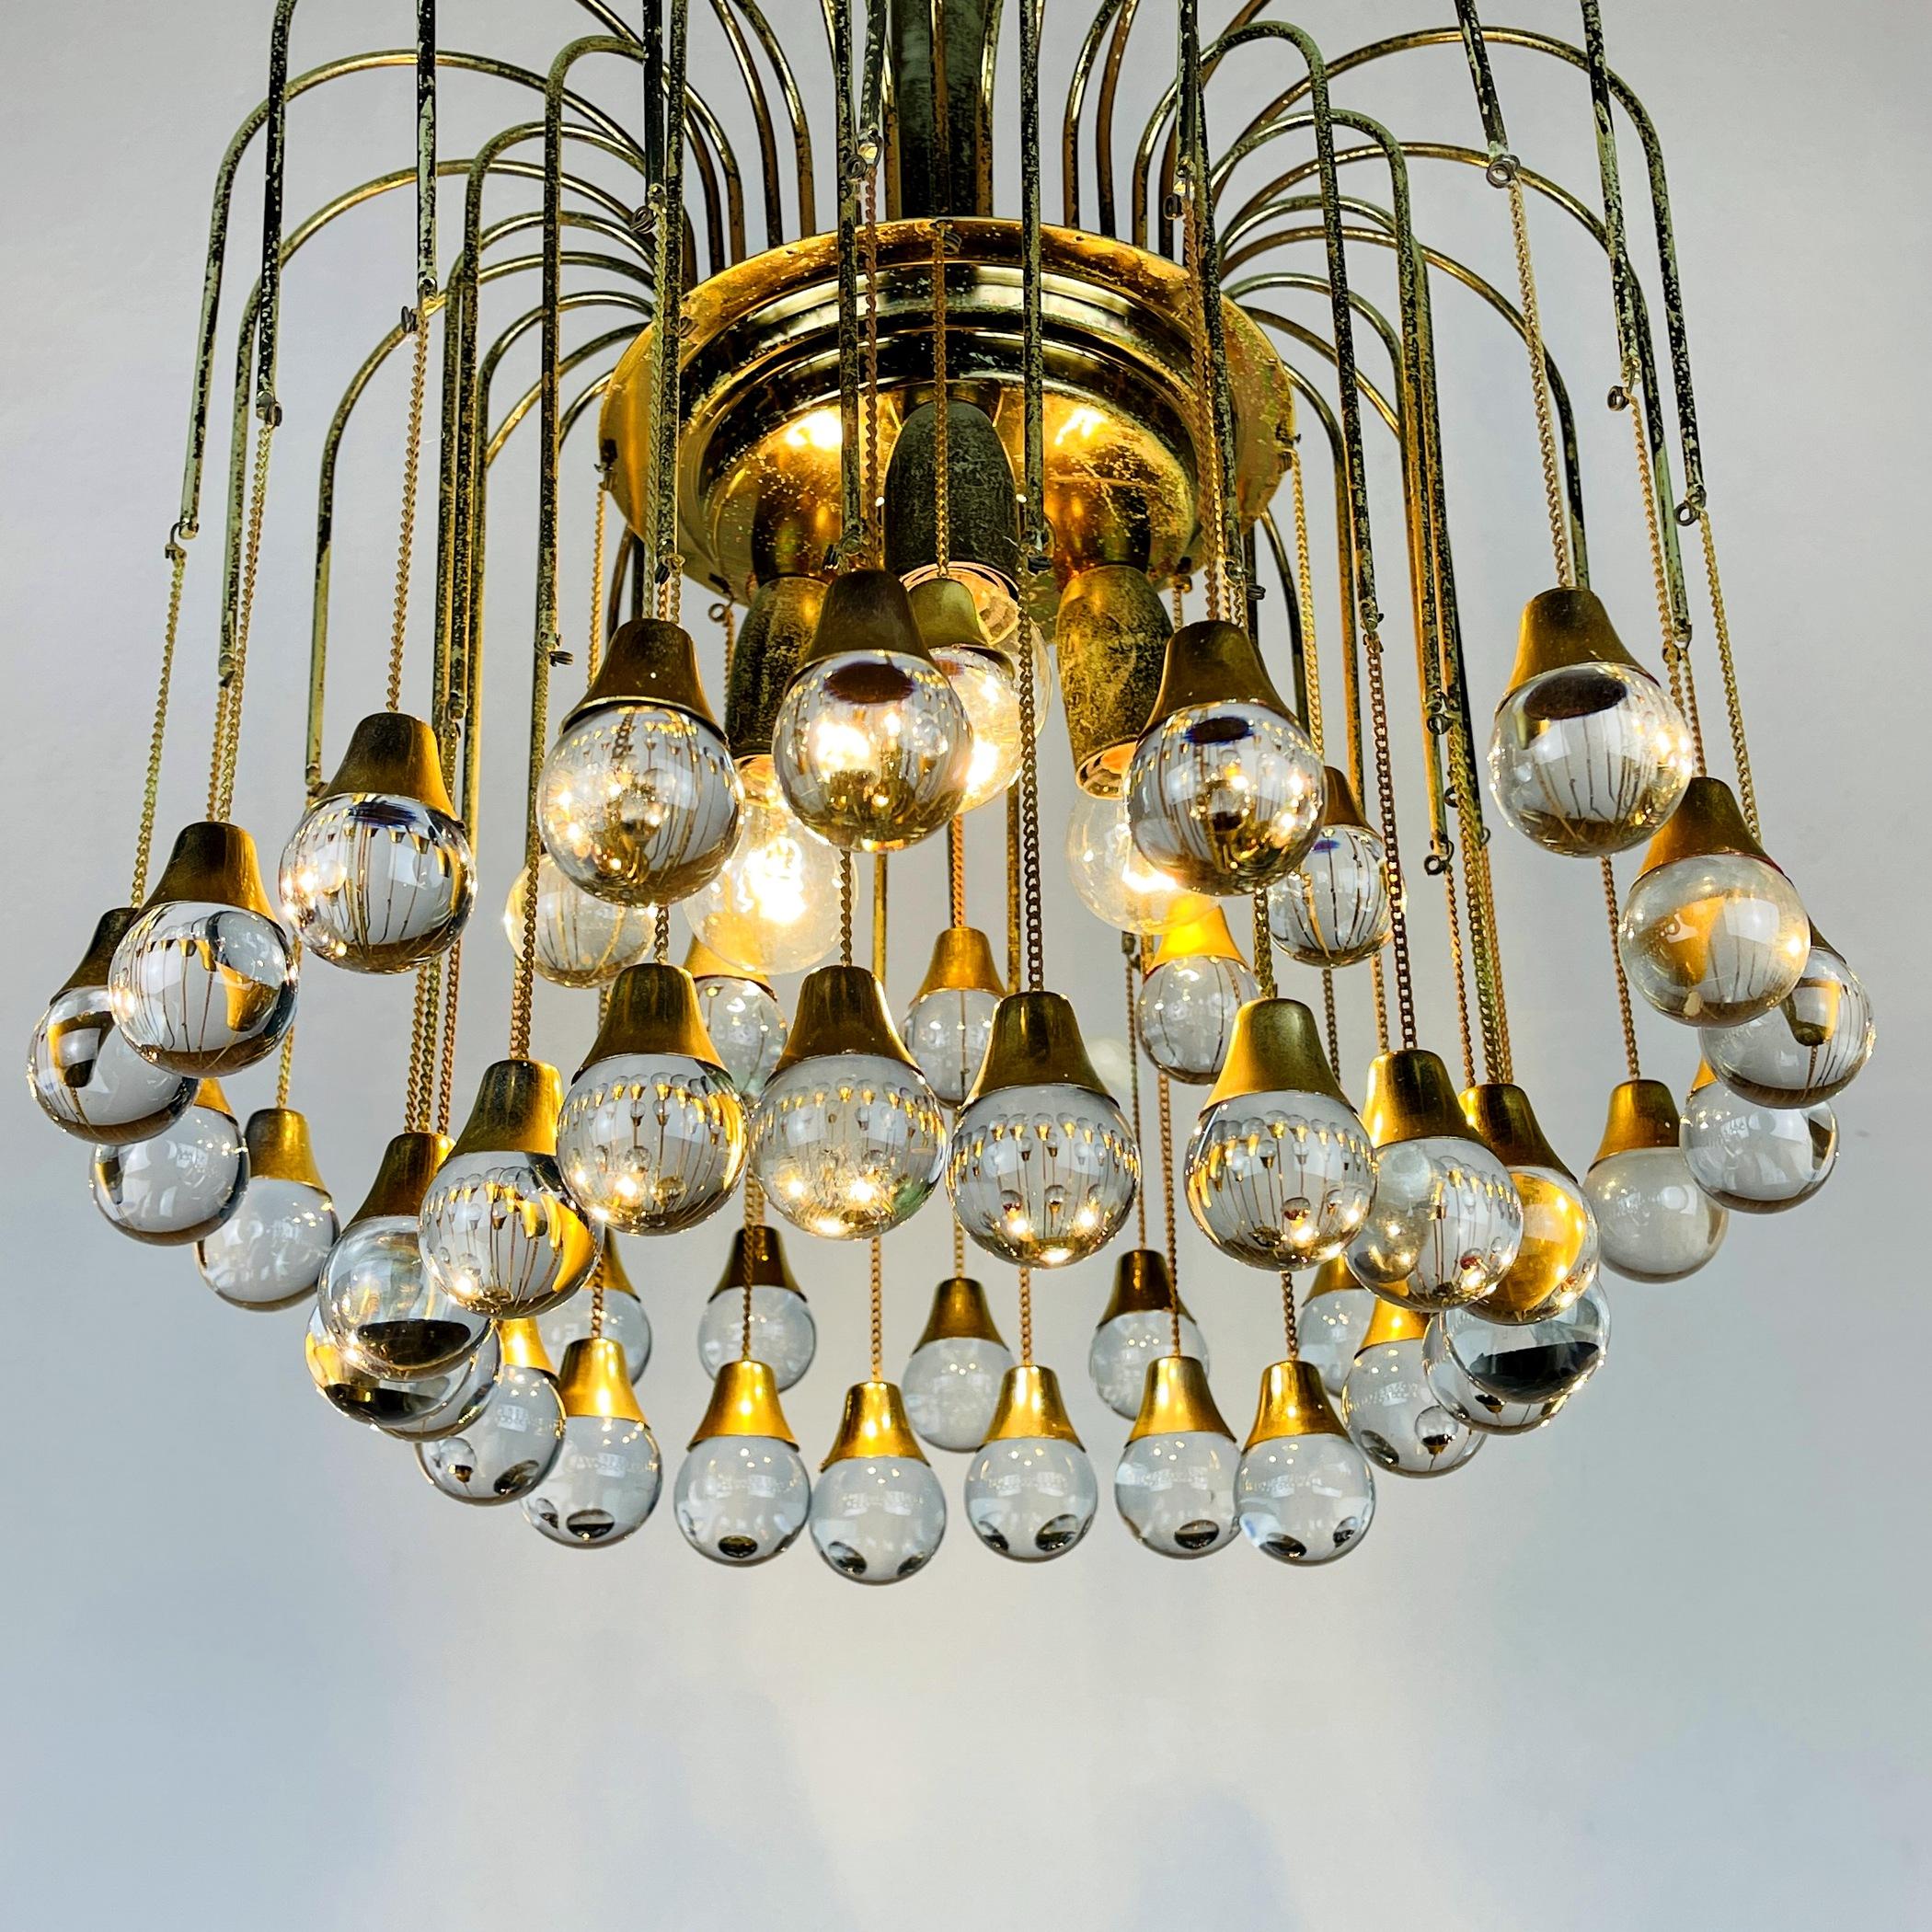 Mid-Century Modern Vintage Cascade Glass Chandelier Italy 1960s Brass and 48 Glass Balls